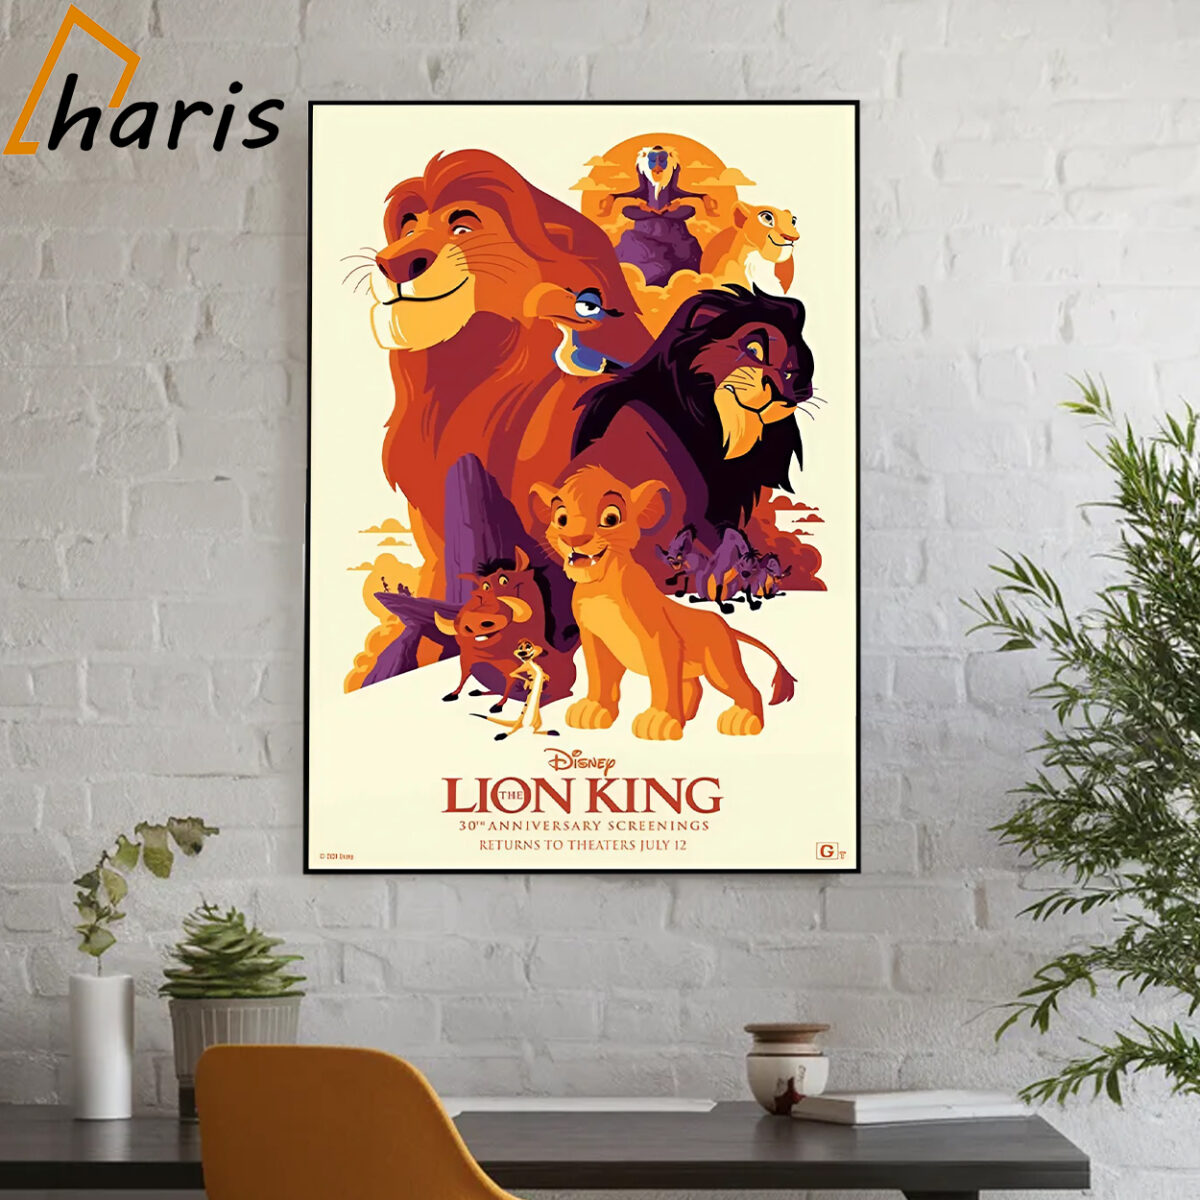 New Poster For The Lion King Releasing In Theaters On July 12 Poster